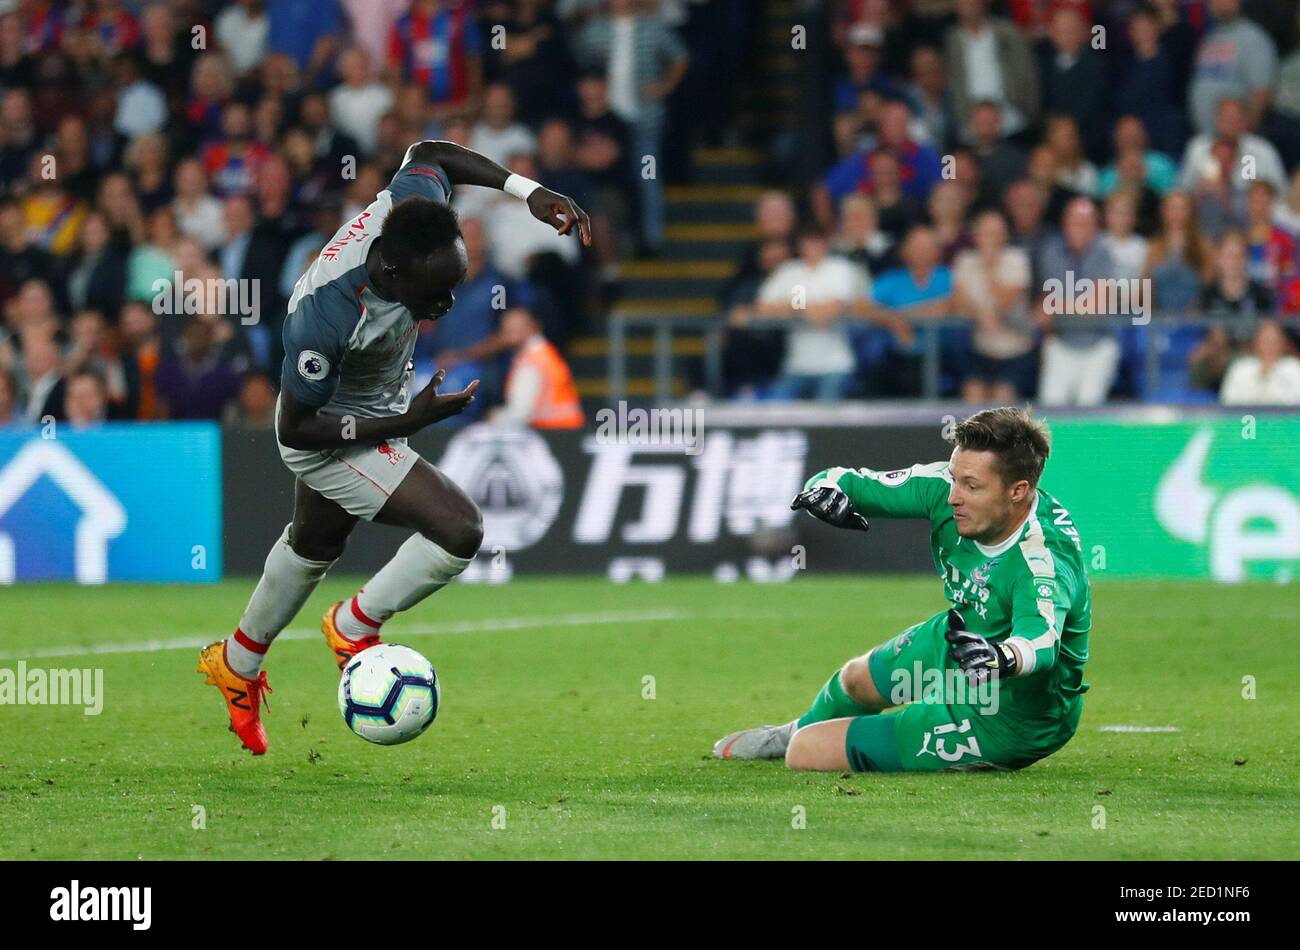 Soccer Football - Premier League - Crystal Palace v Liverpool - Selhurst Park, London, Britain - August 20, 2018  Liverpool's Sadio Mane scores their second goal                      REUTERS/Eddie Keogh  EDITORIAL USE ONLY. No use with unauthorized audio, video, data, fixture lists, club/league logos or 'live' services. Online in-match use limited to 75 images, no video emulation. No use in betting, games or single club/league/player publications.  Please contact your account representative for further details. Stock Photo